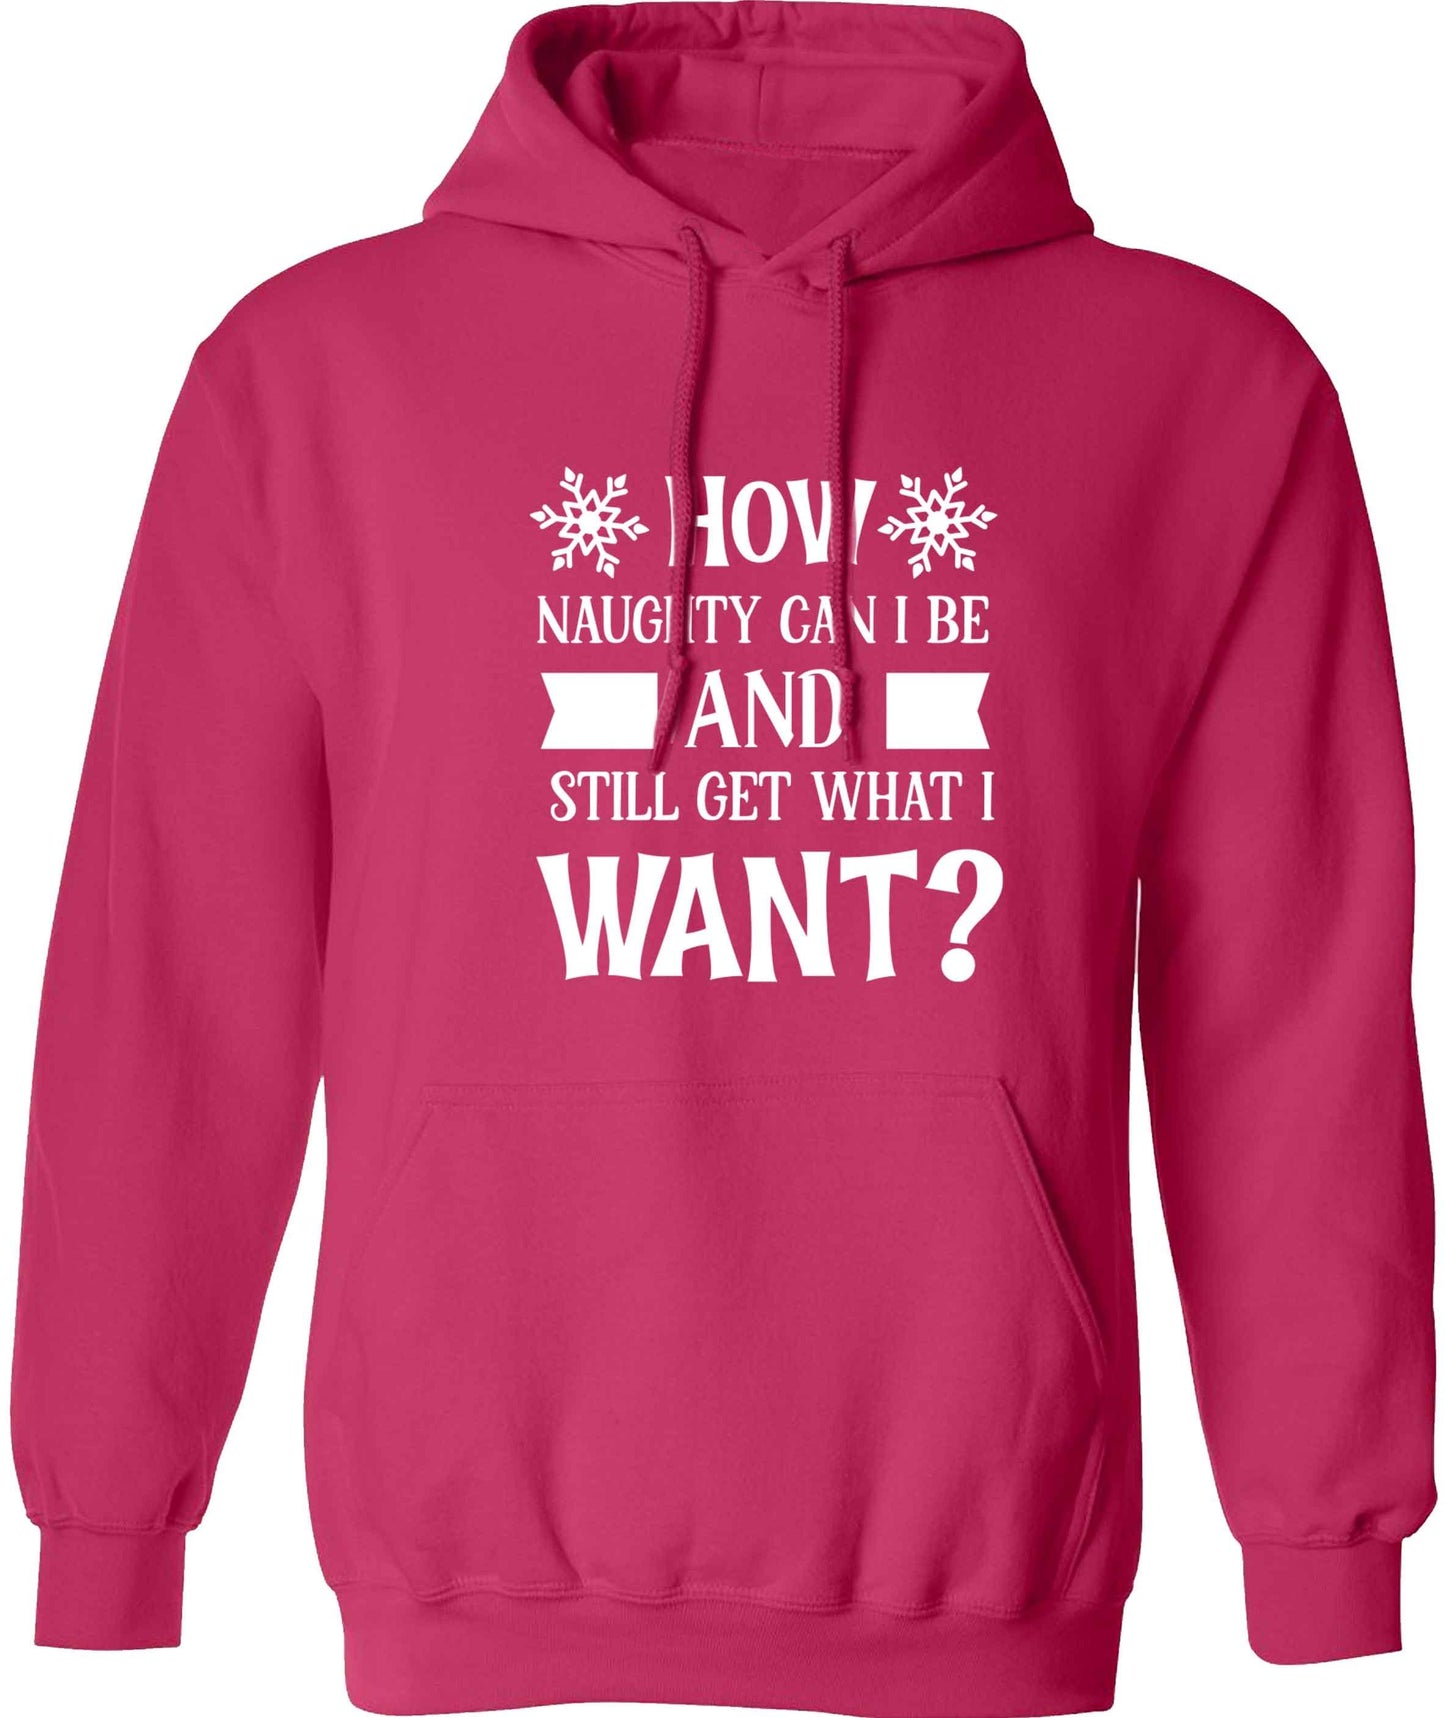 How naughty can I be and still get what I want? adults unisex pink hoodie 2XL